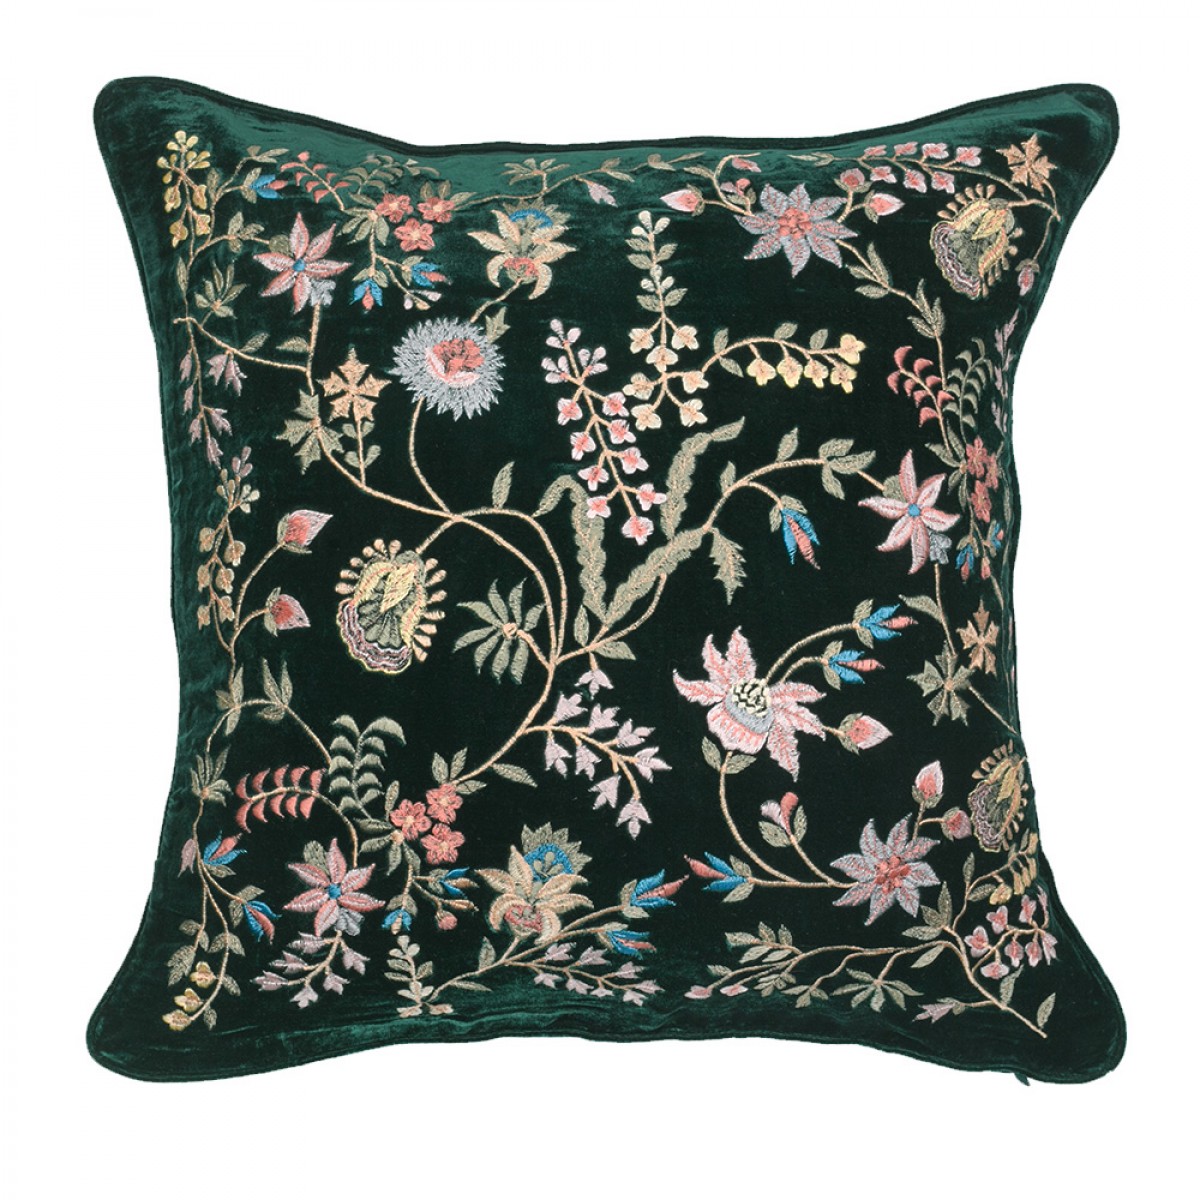 Designer Embroidered Cushion Cover - Teal Green